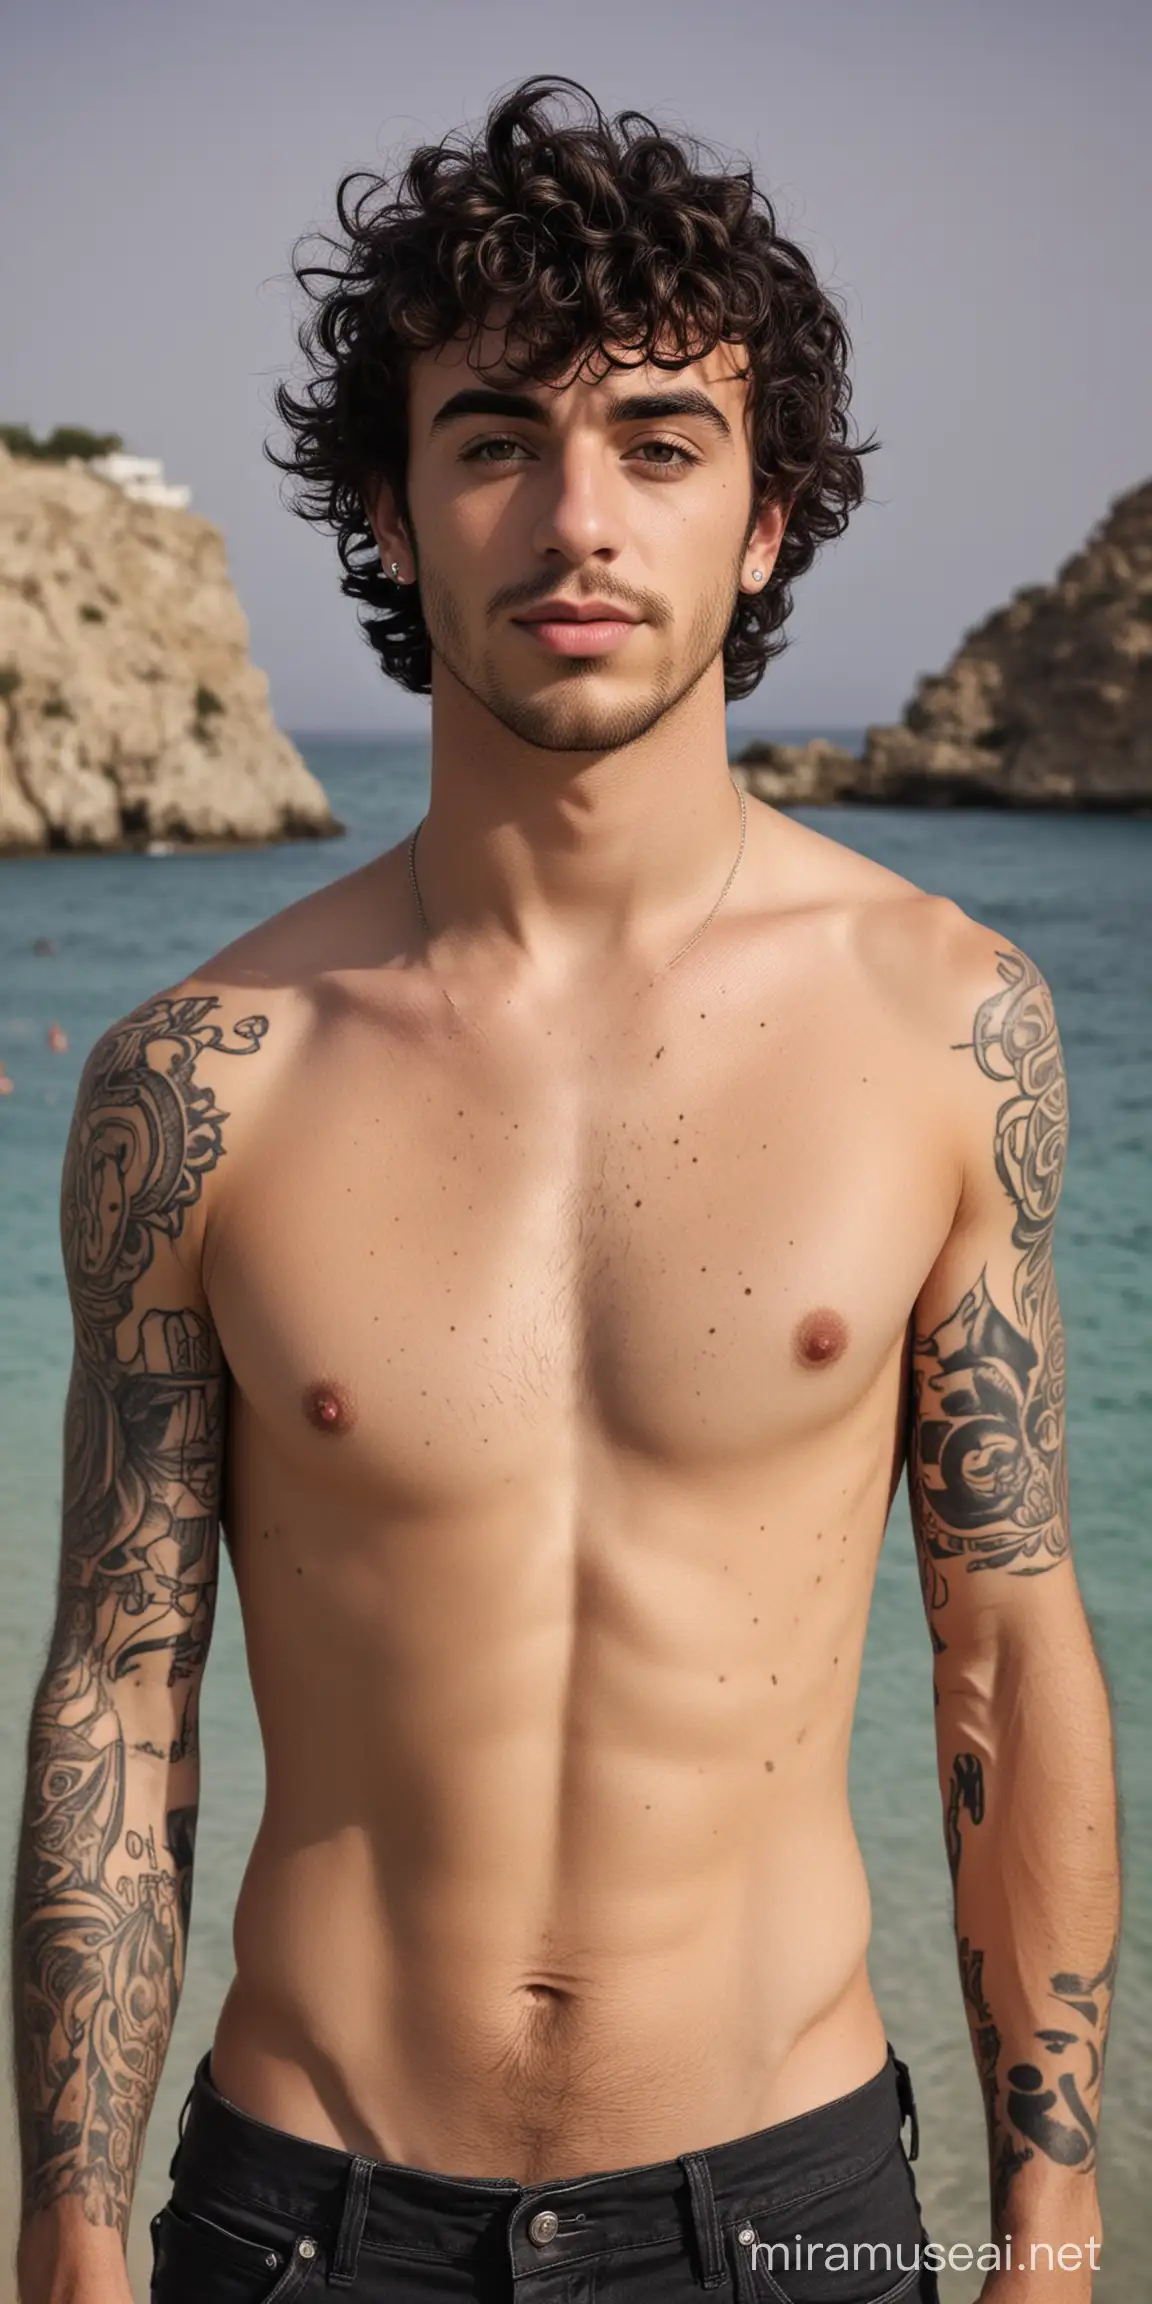 Generate an image of a man that looks like a combination between Taylor York and Oli Sykes, he has dark curly hair, he is lean but muscular, he is a rock star, he is in Greece on holiday, he has tattooes